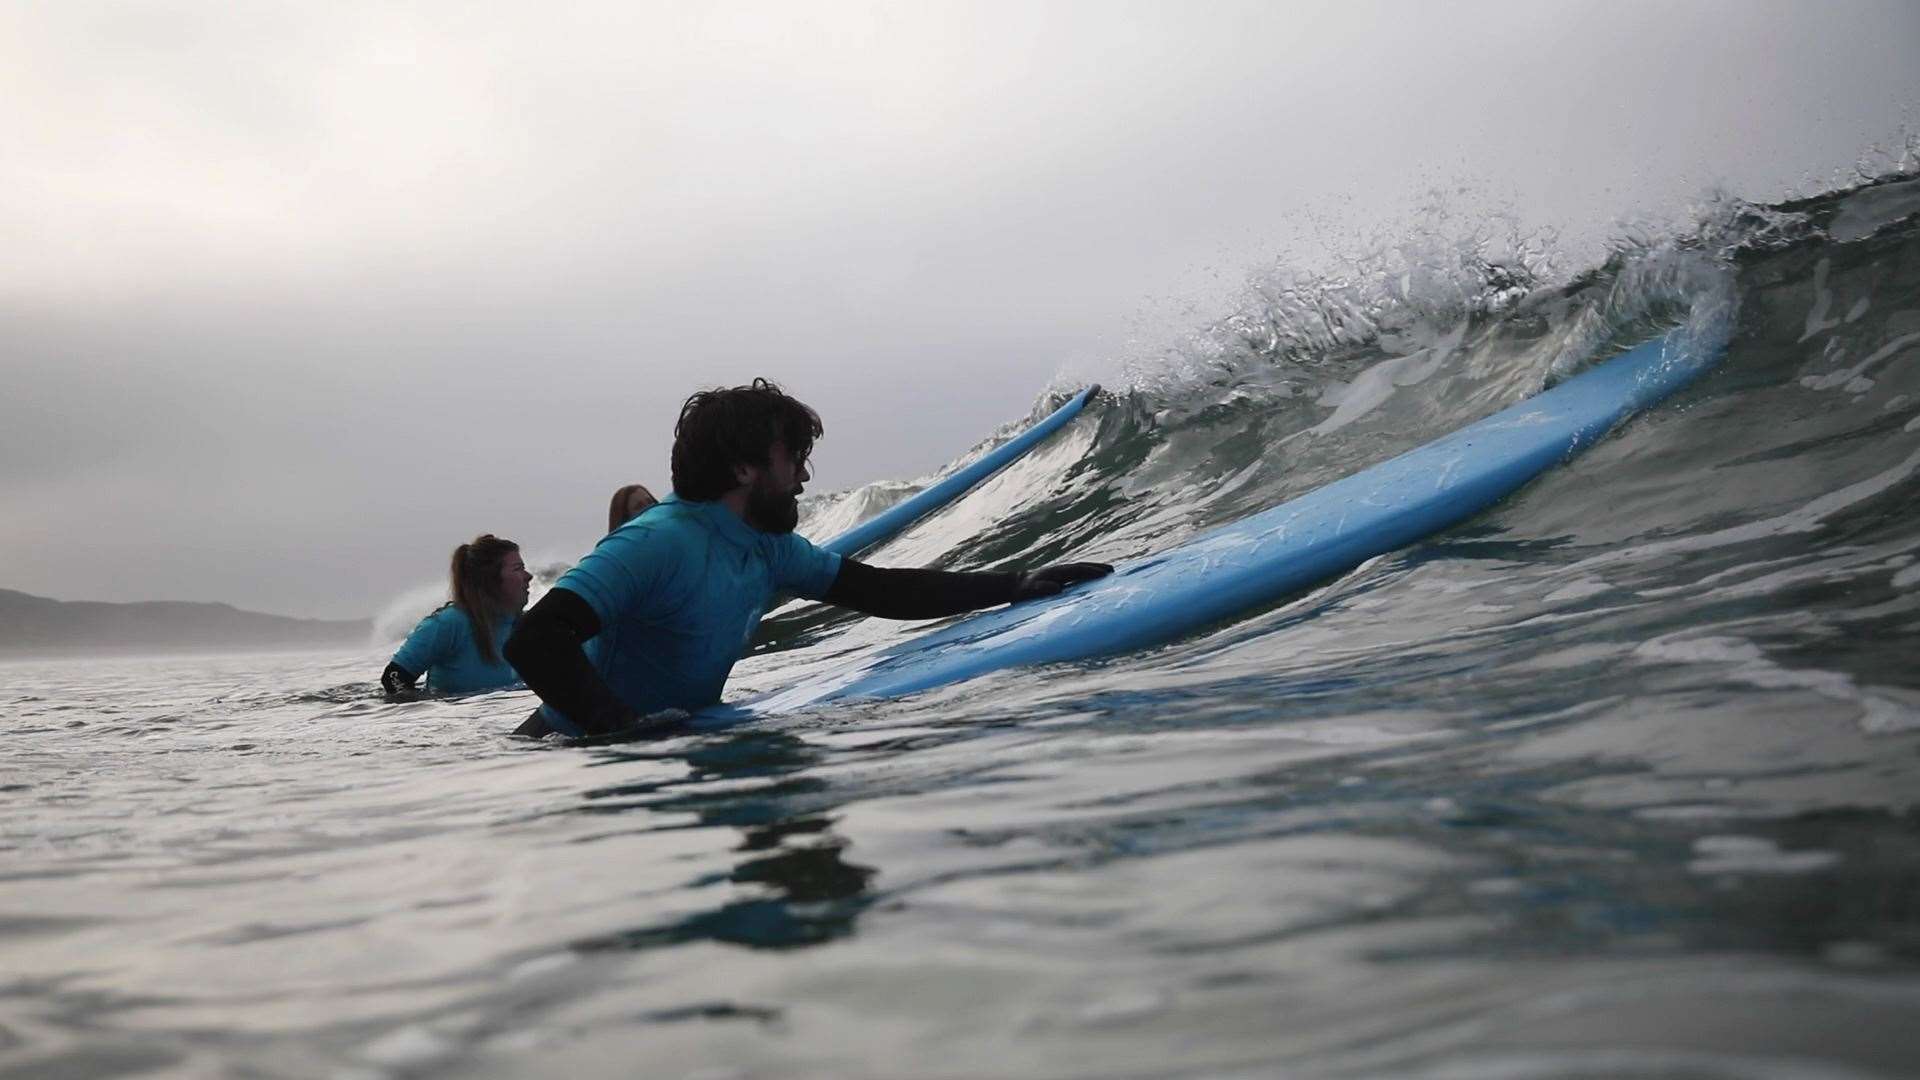 Activities such as surfing with North Coast Watersports at Thurso can help attract people to the region. Picture: Venture North